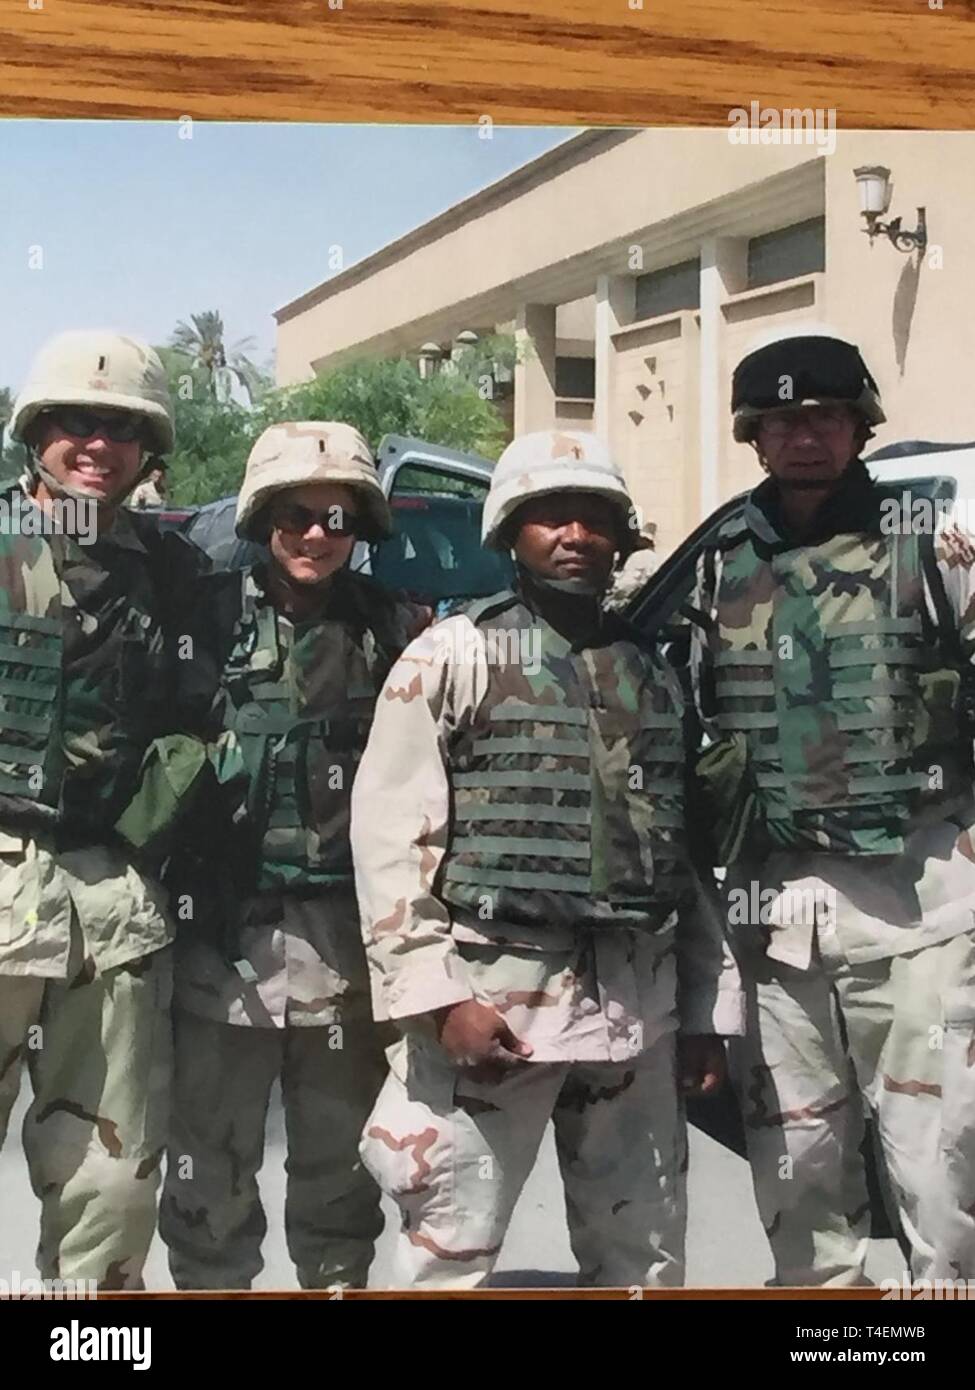 During Operation Iraqi Freedom, 1st Sgt. Charles Kampa, right, with 452nd Combat Support Hospital, poses with members of the unit while in Iraq in 2003. Kampa is part of four generations of his family to serve in the Army. His son, retired Sgt. Cory Lien and grandson, Spc. Cory Lien Jr., all spent time in Kuwait. Lien Jr. is currently serving with the 452nd CSH in Camp Arifjan, Kuwait. Stock Photo